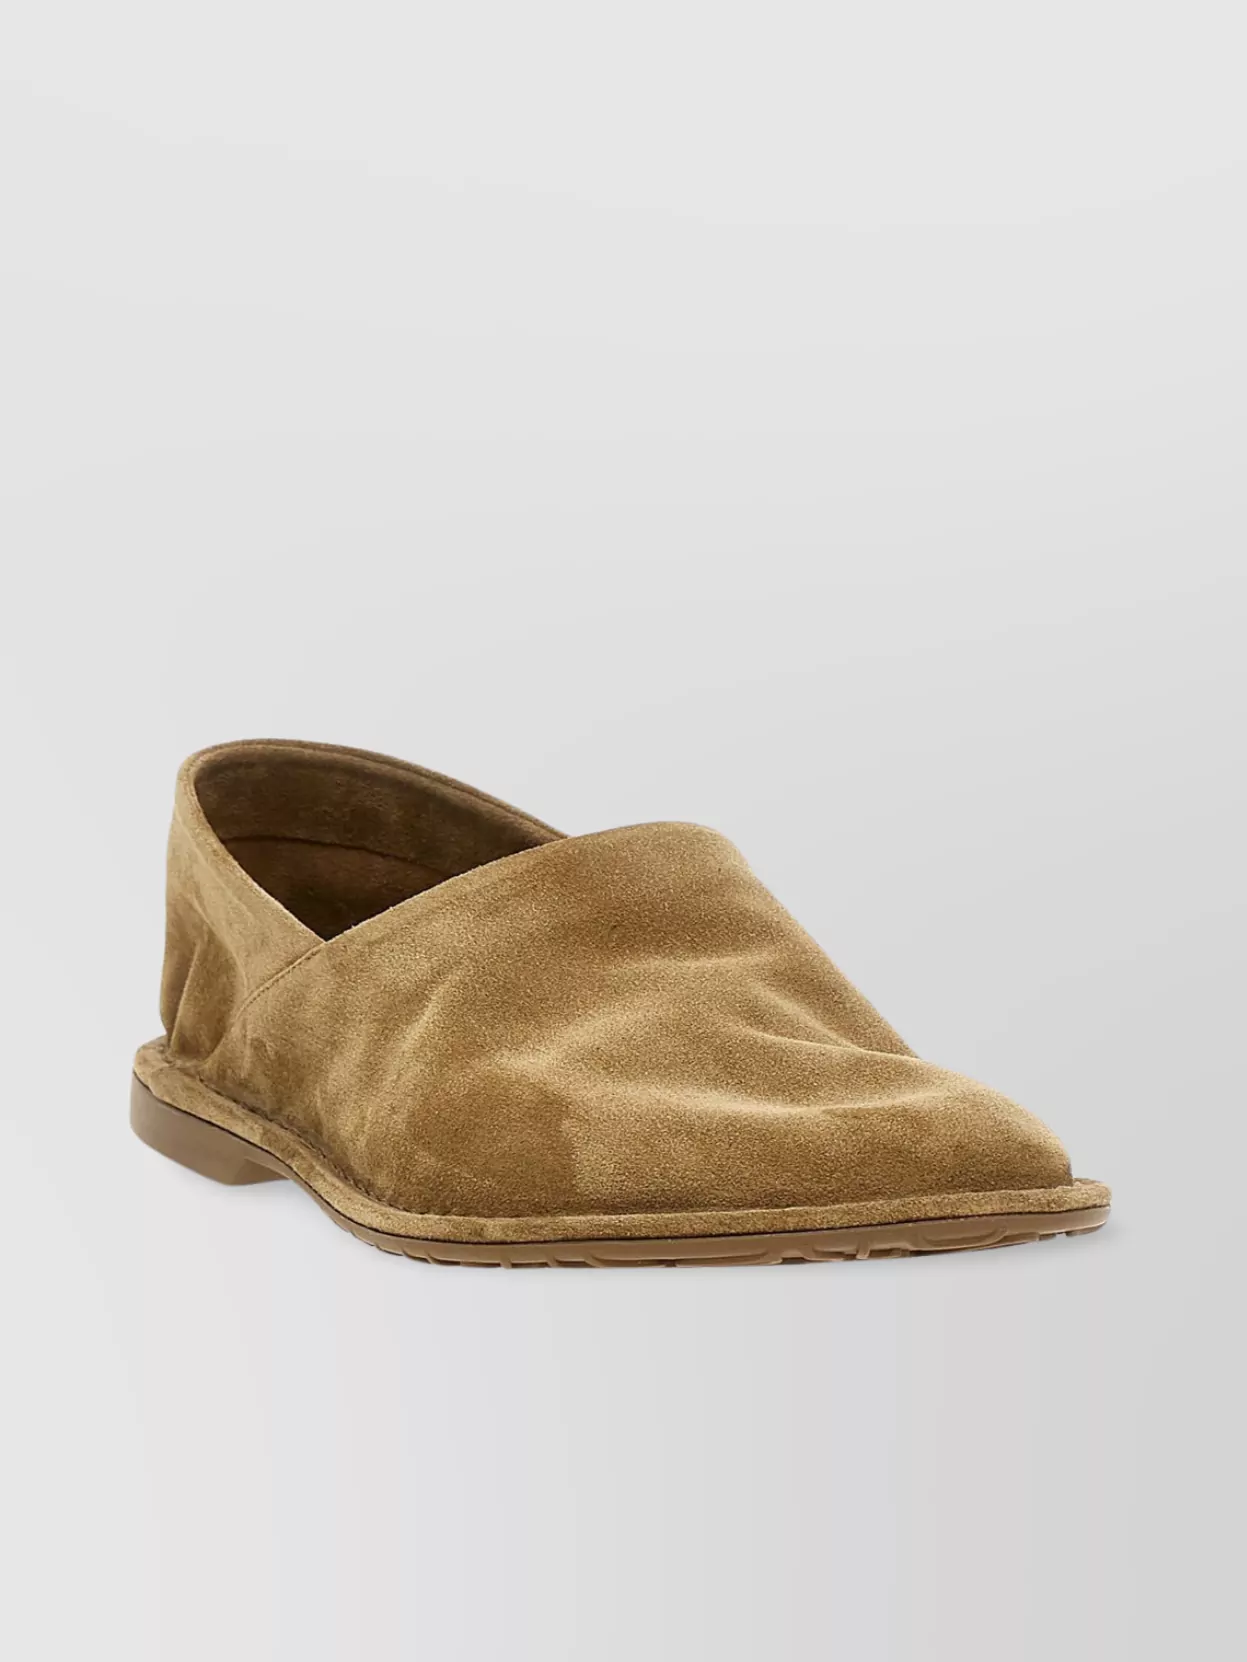 Loewe Slip-on Suede Slippers With Flat Rubber Sole